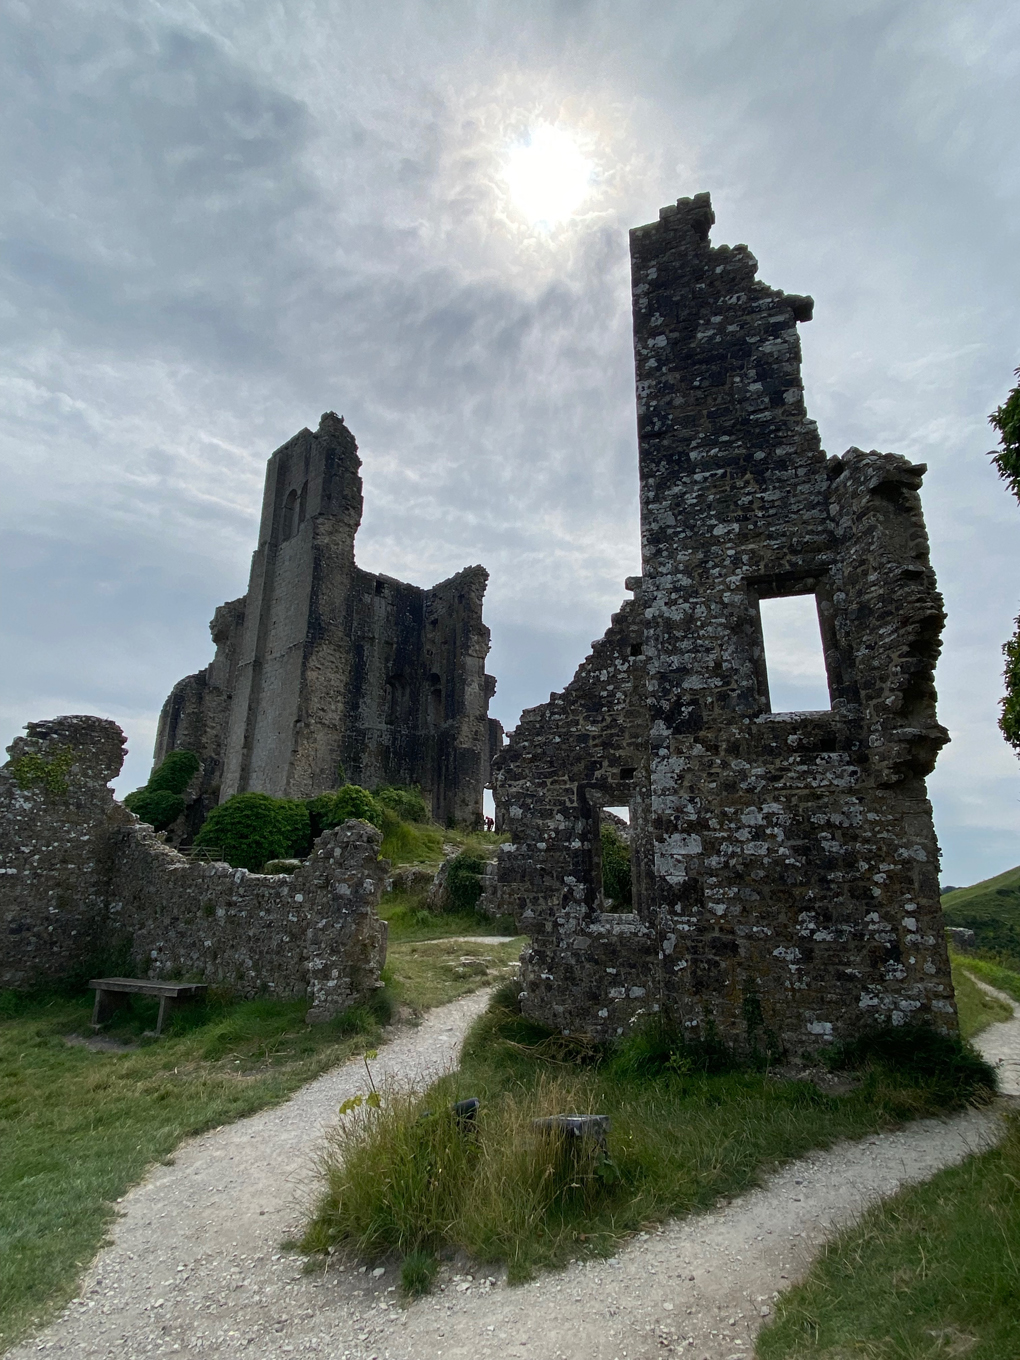 The ruins of Corfe Castle, with the sun breaking through clouds in the background